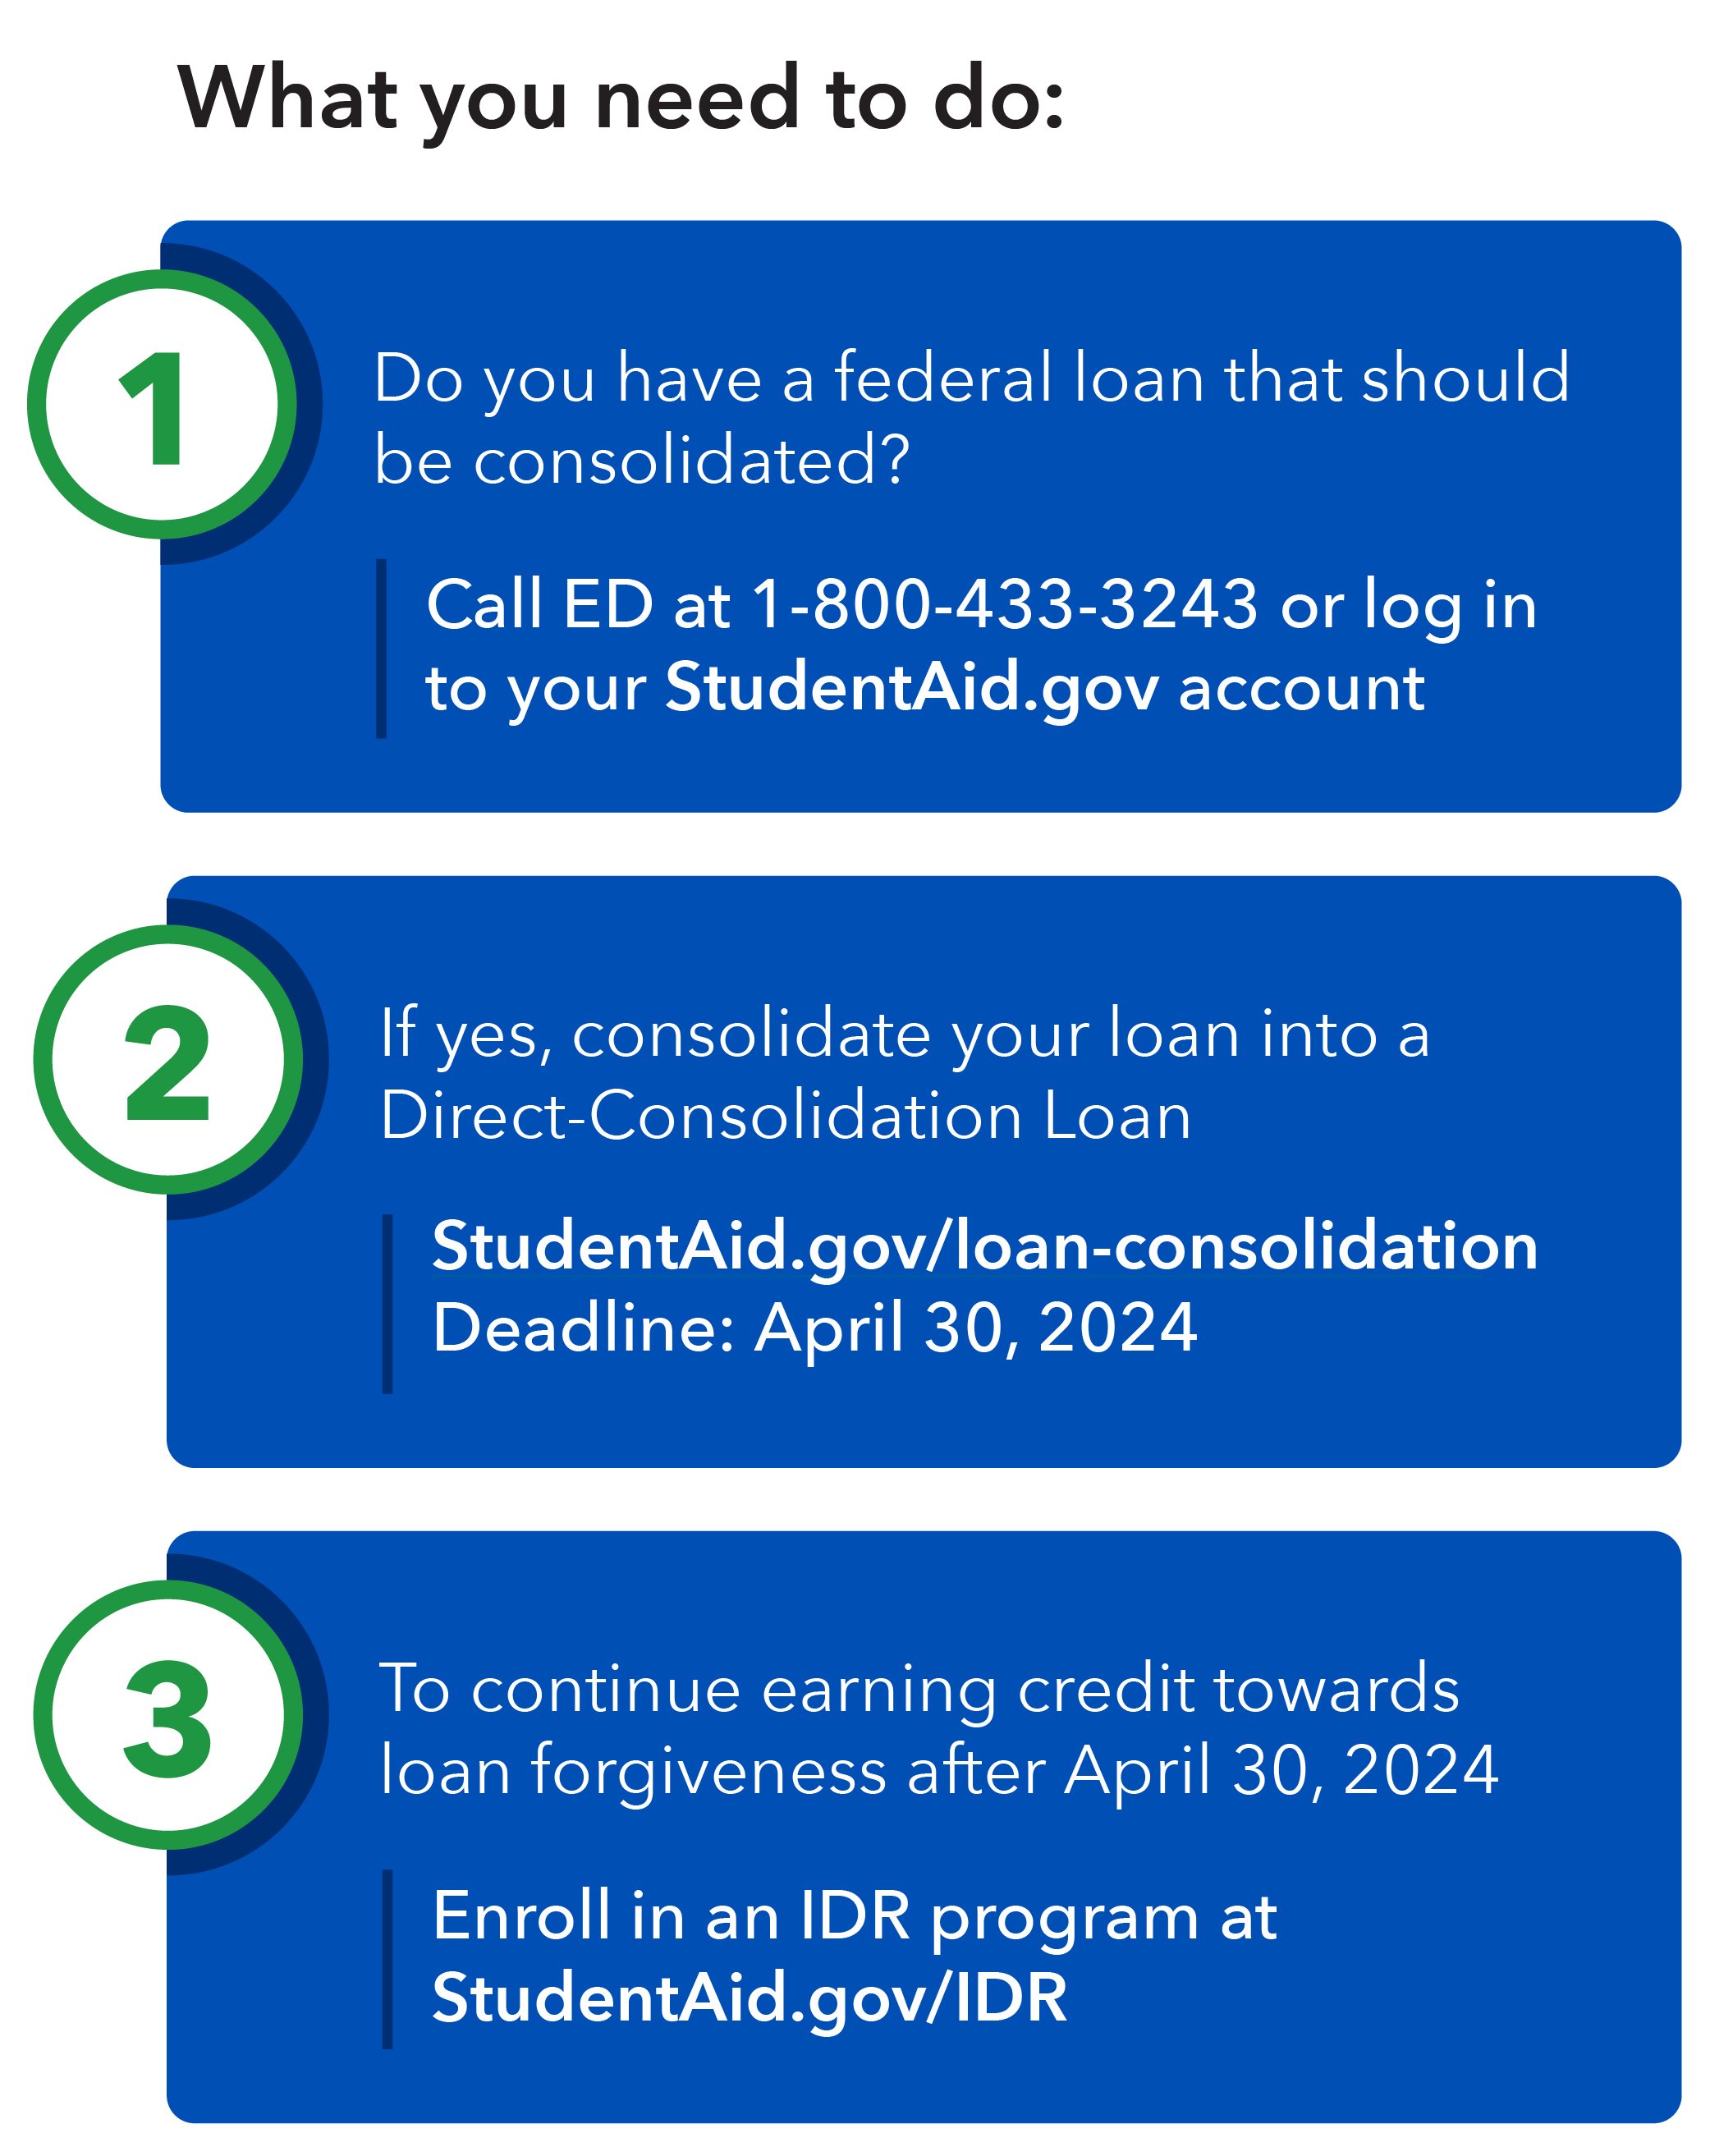 Graphic shows three boxes numbered one through three.  Box one states: Do you have a loan that should be consolidated? Call ED at 1-800-433-3243 or log in to your StudentAid.gov account.  Box two states: If yes, consolidate your loan into a Direct-Consolidation Loan. The deadline is April 30, 2024. You can consolidate at StudentAid.gov/loan-consolidation.  Box three states: To continuing earning credit towards loan forgiveness after April 30, 2024 enroll in an IDR program at StudentAid.gov/IDR.